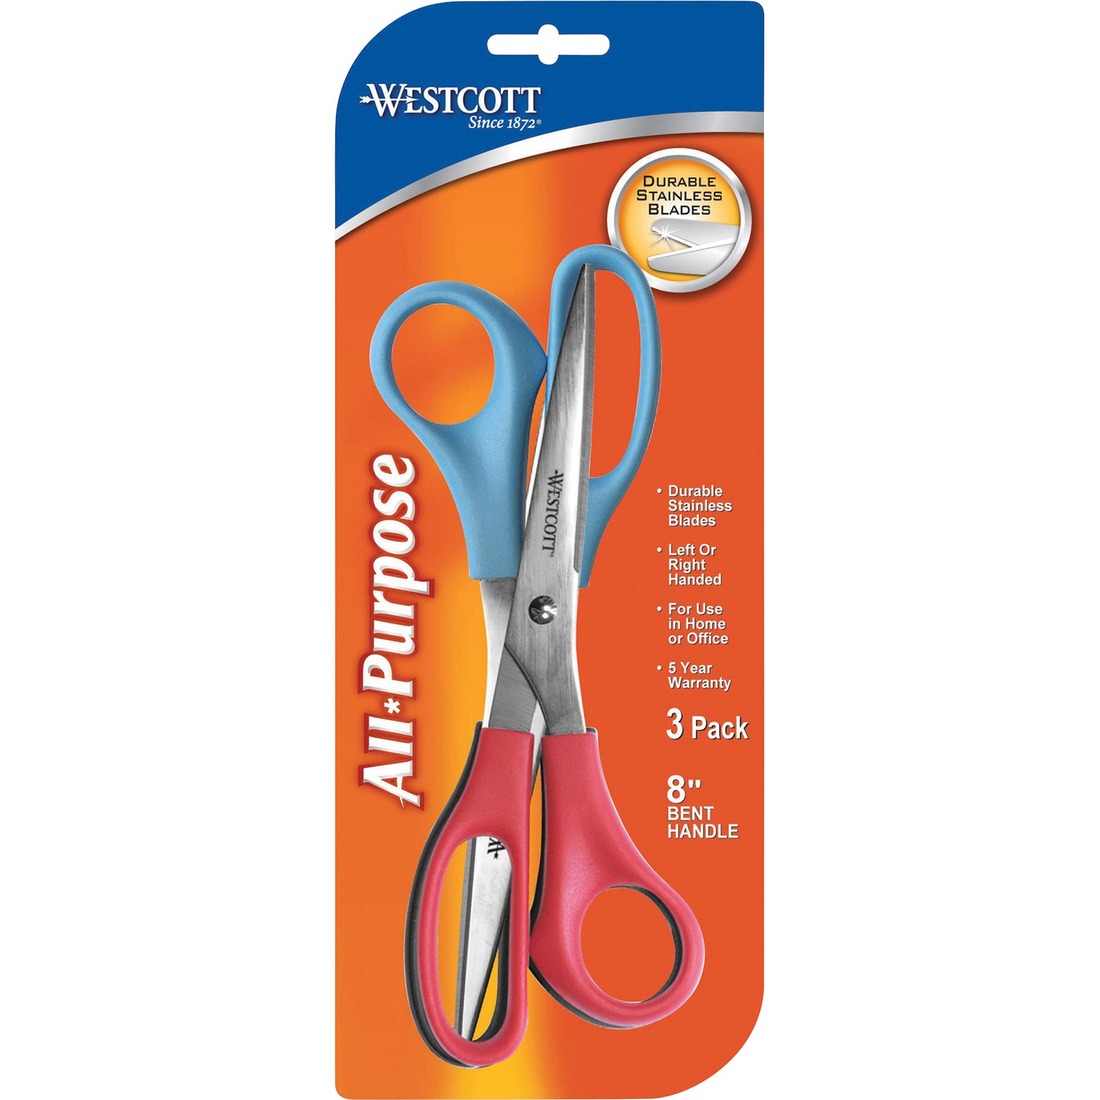 Westcott All Purpose Value Scissors, 8", Straight, 3-Pack, Assorted Colors - image 2 of 8